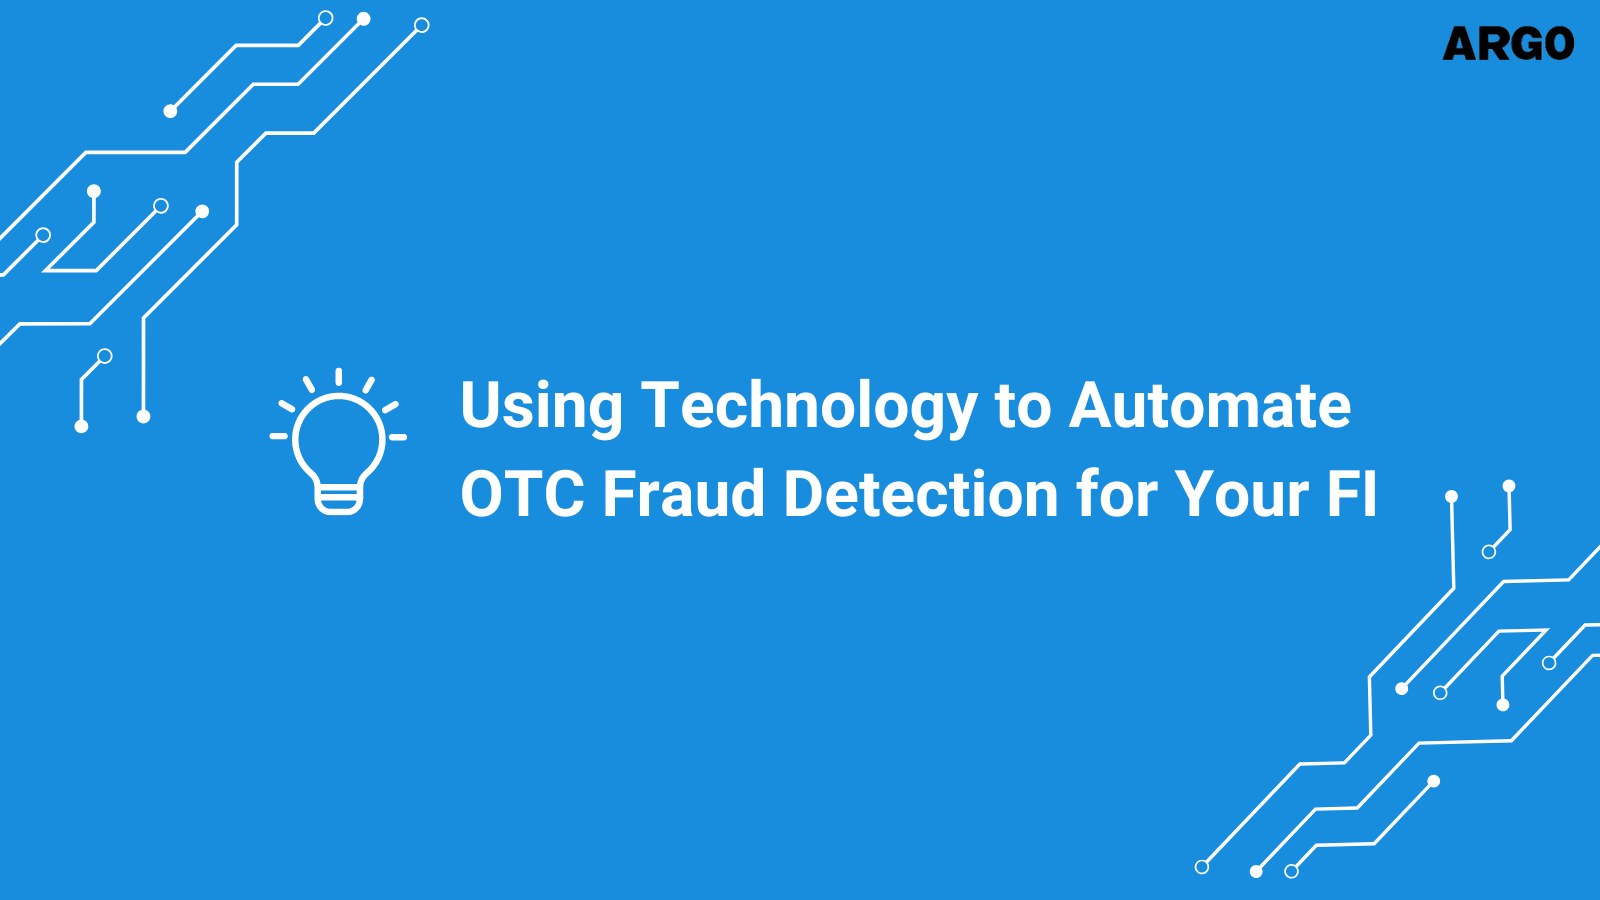 Using Technology to Automate OTC Fraud Detection for Your FI